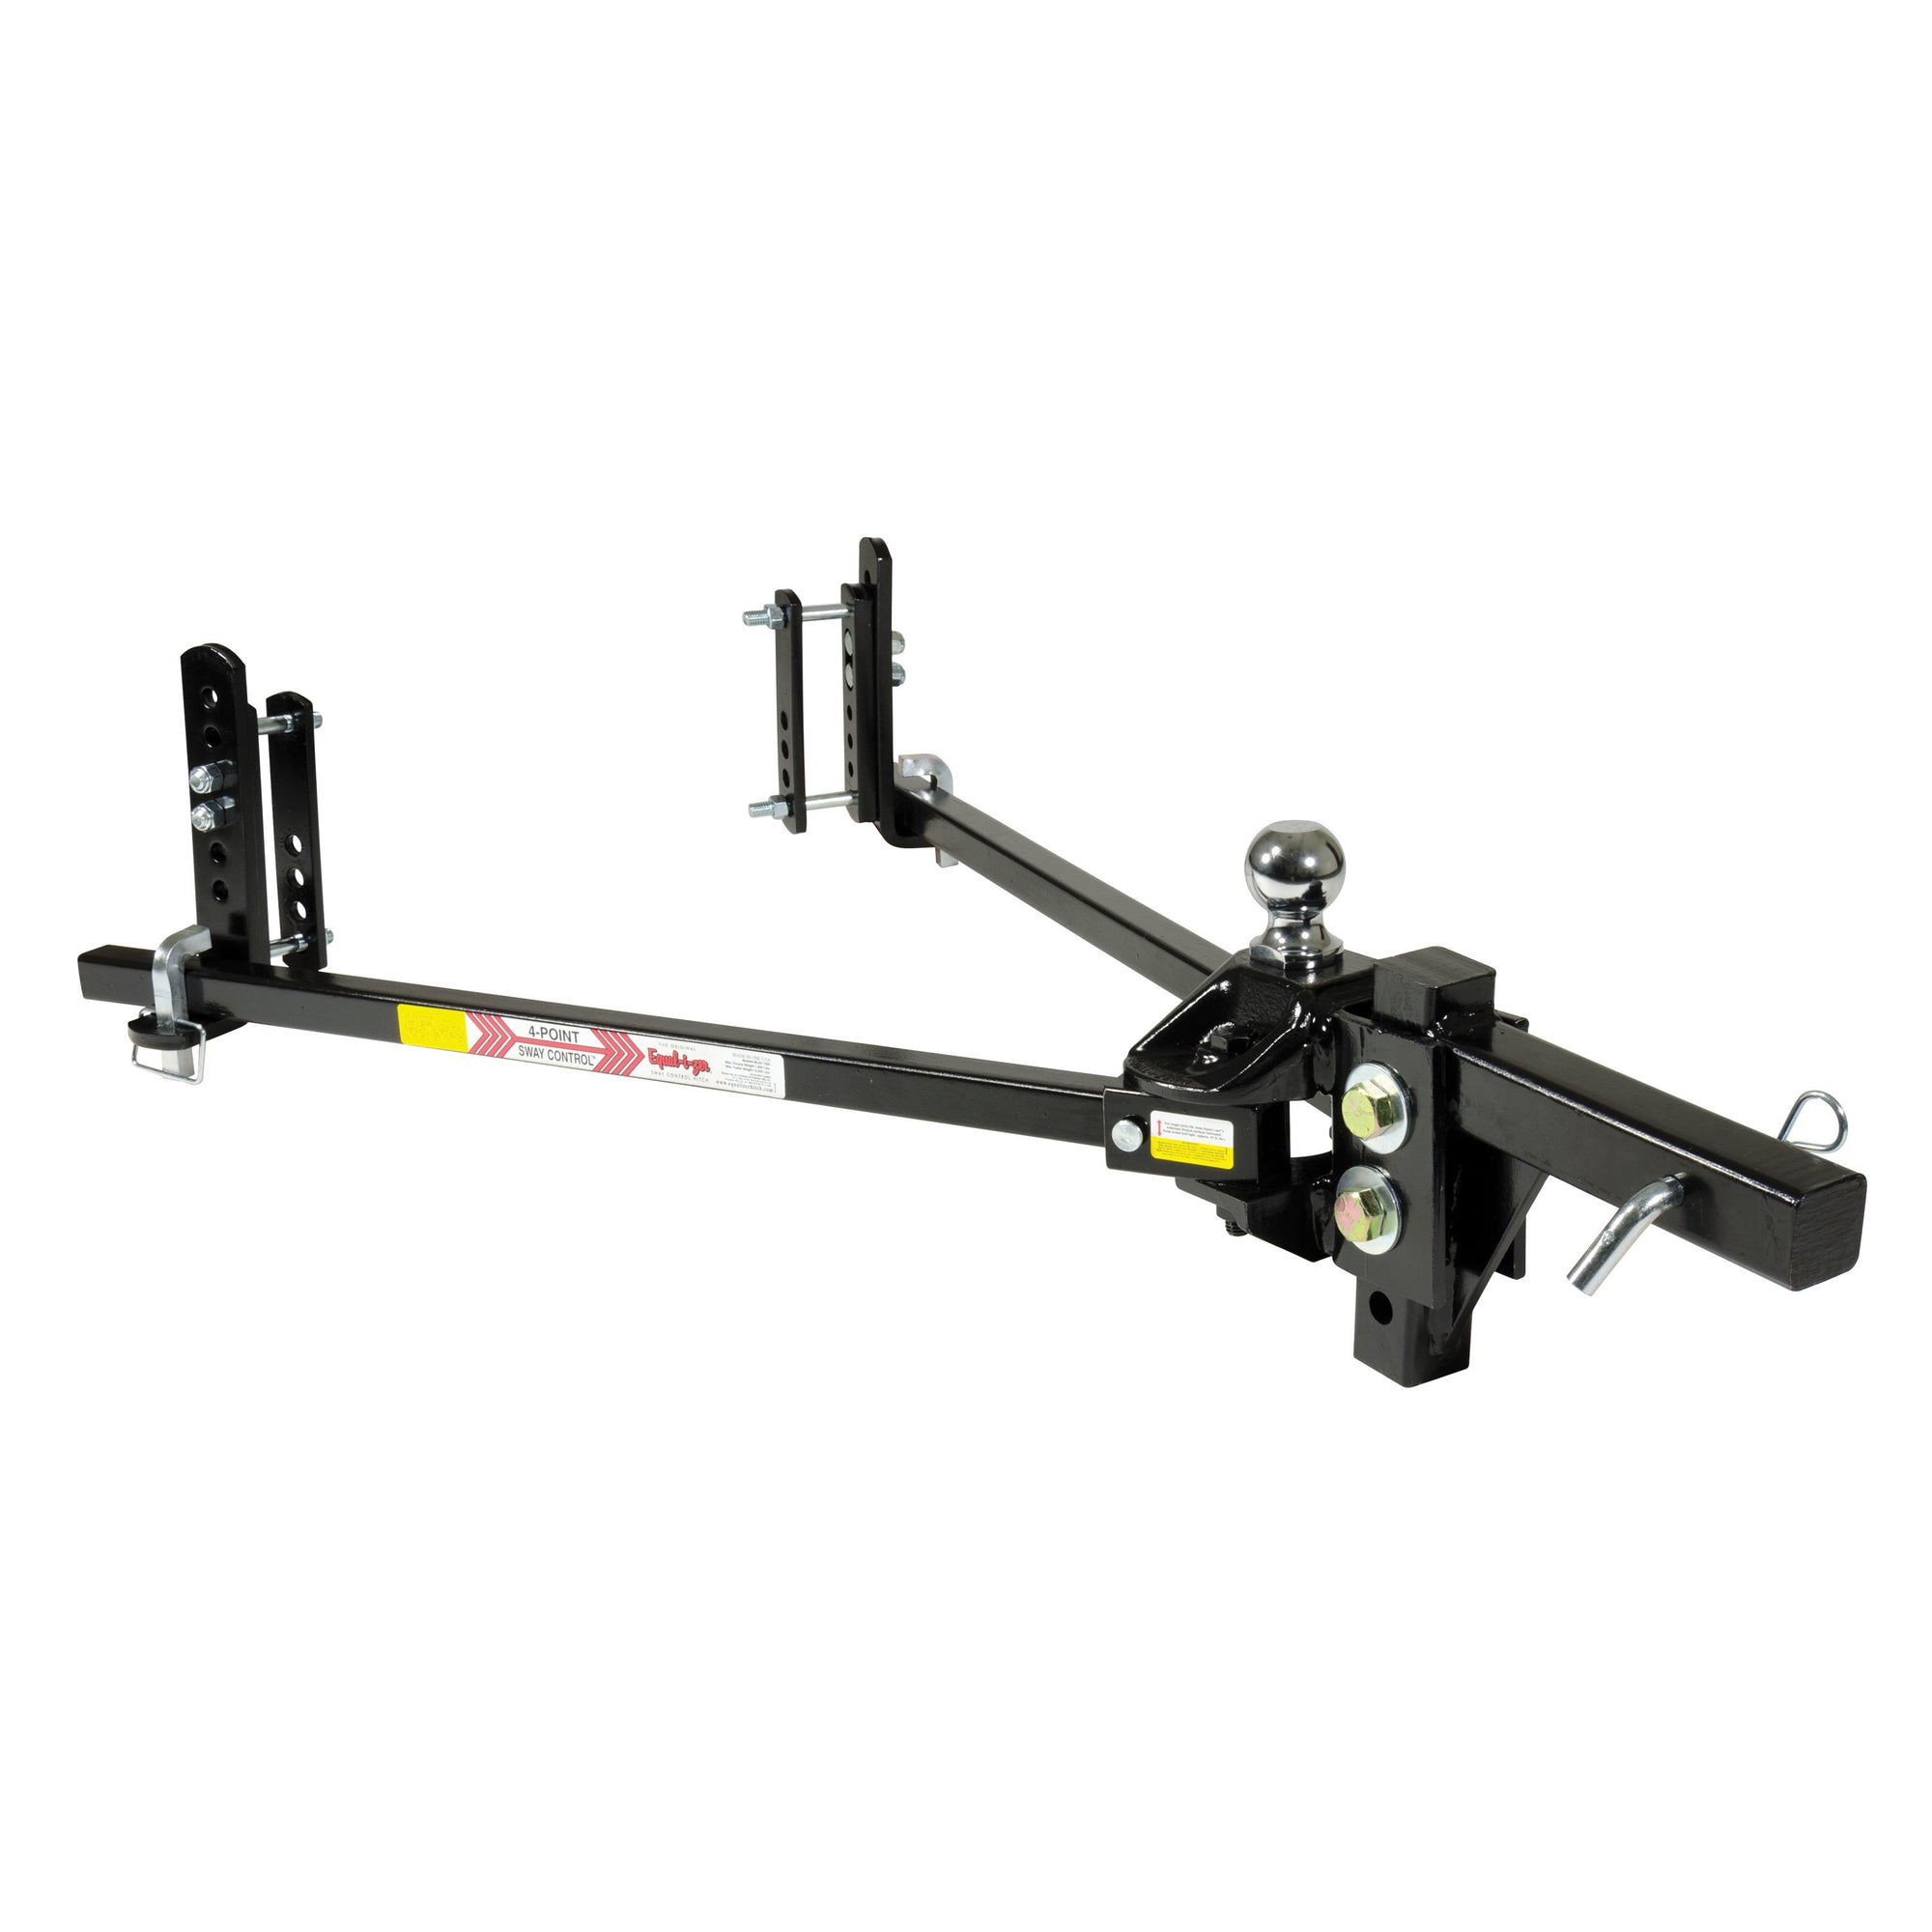 Equal-i-zer 90-00-0400 Sway Control Hitch - 400 lbs. TW/4,000 lbs. GTW